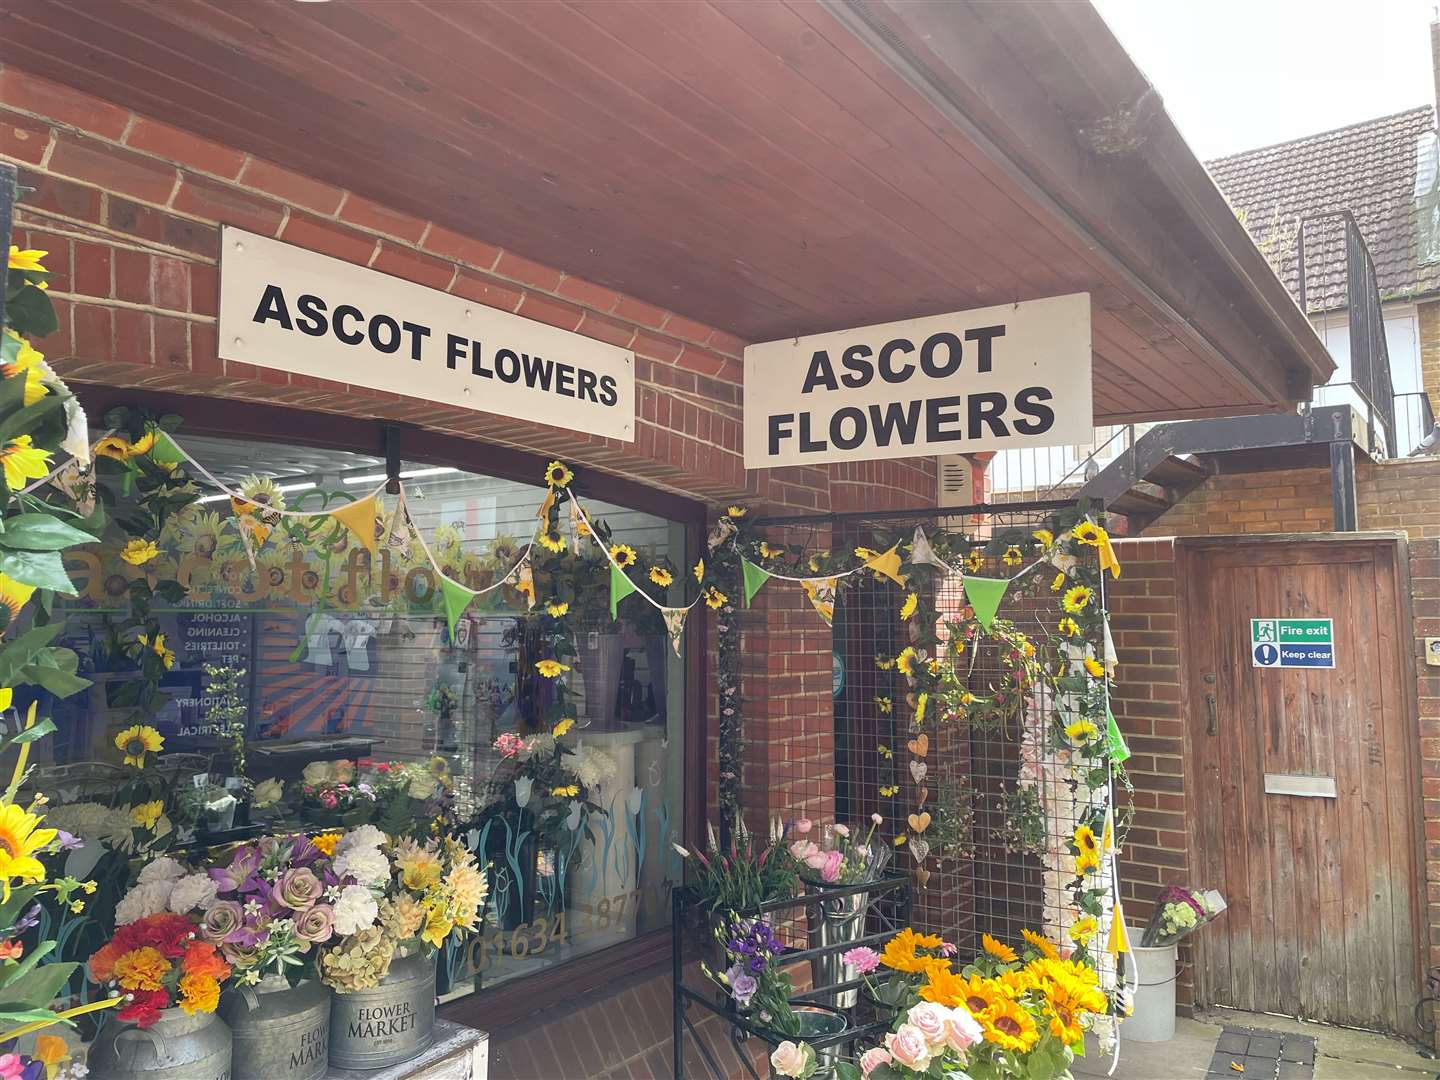 Ascot Flowers relies on the footfall to stay afloat